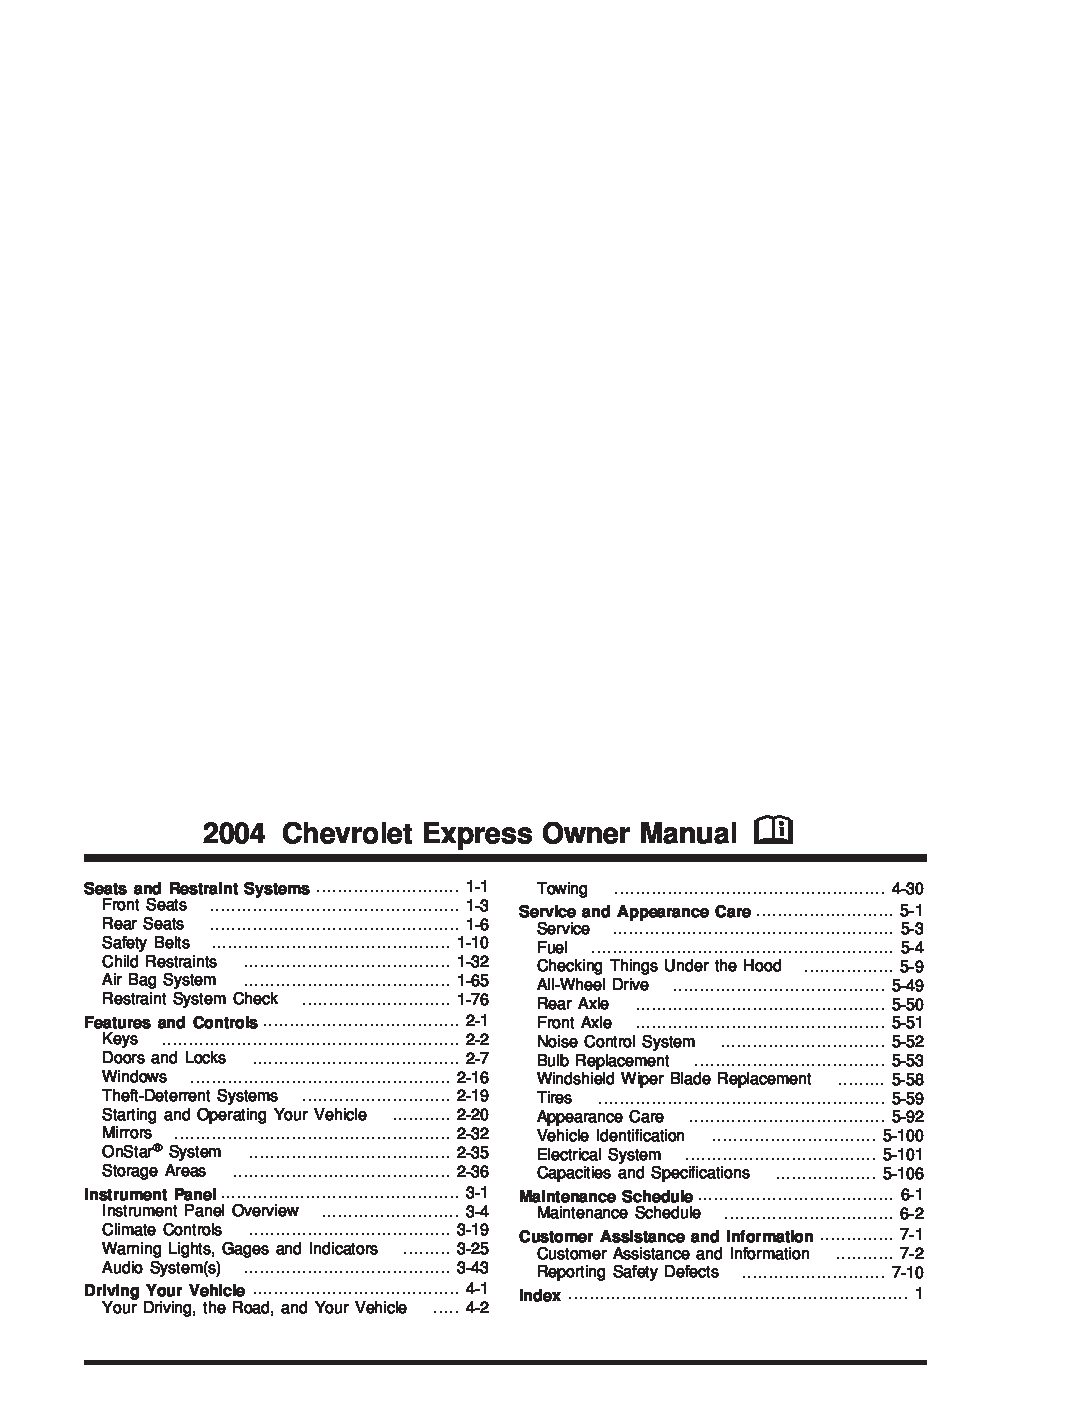 2004 Chevrolet Express Owner’s Manual Image